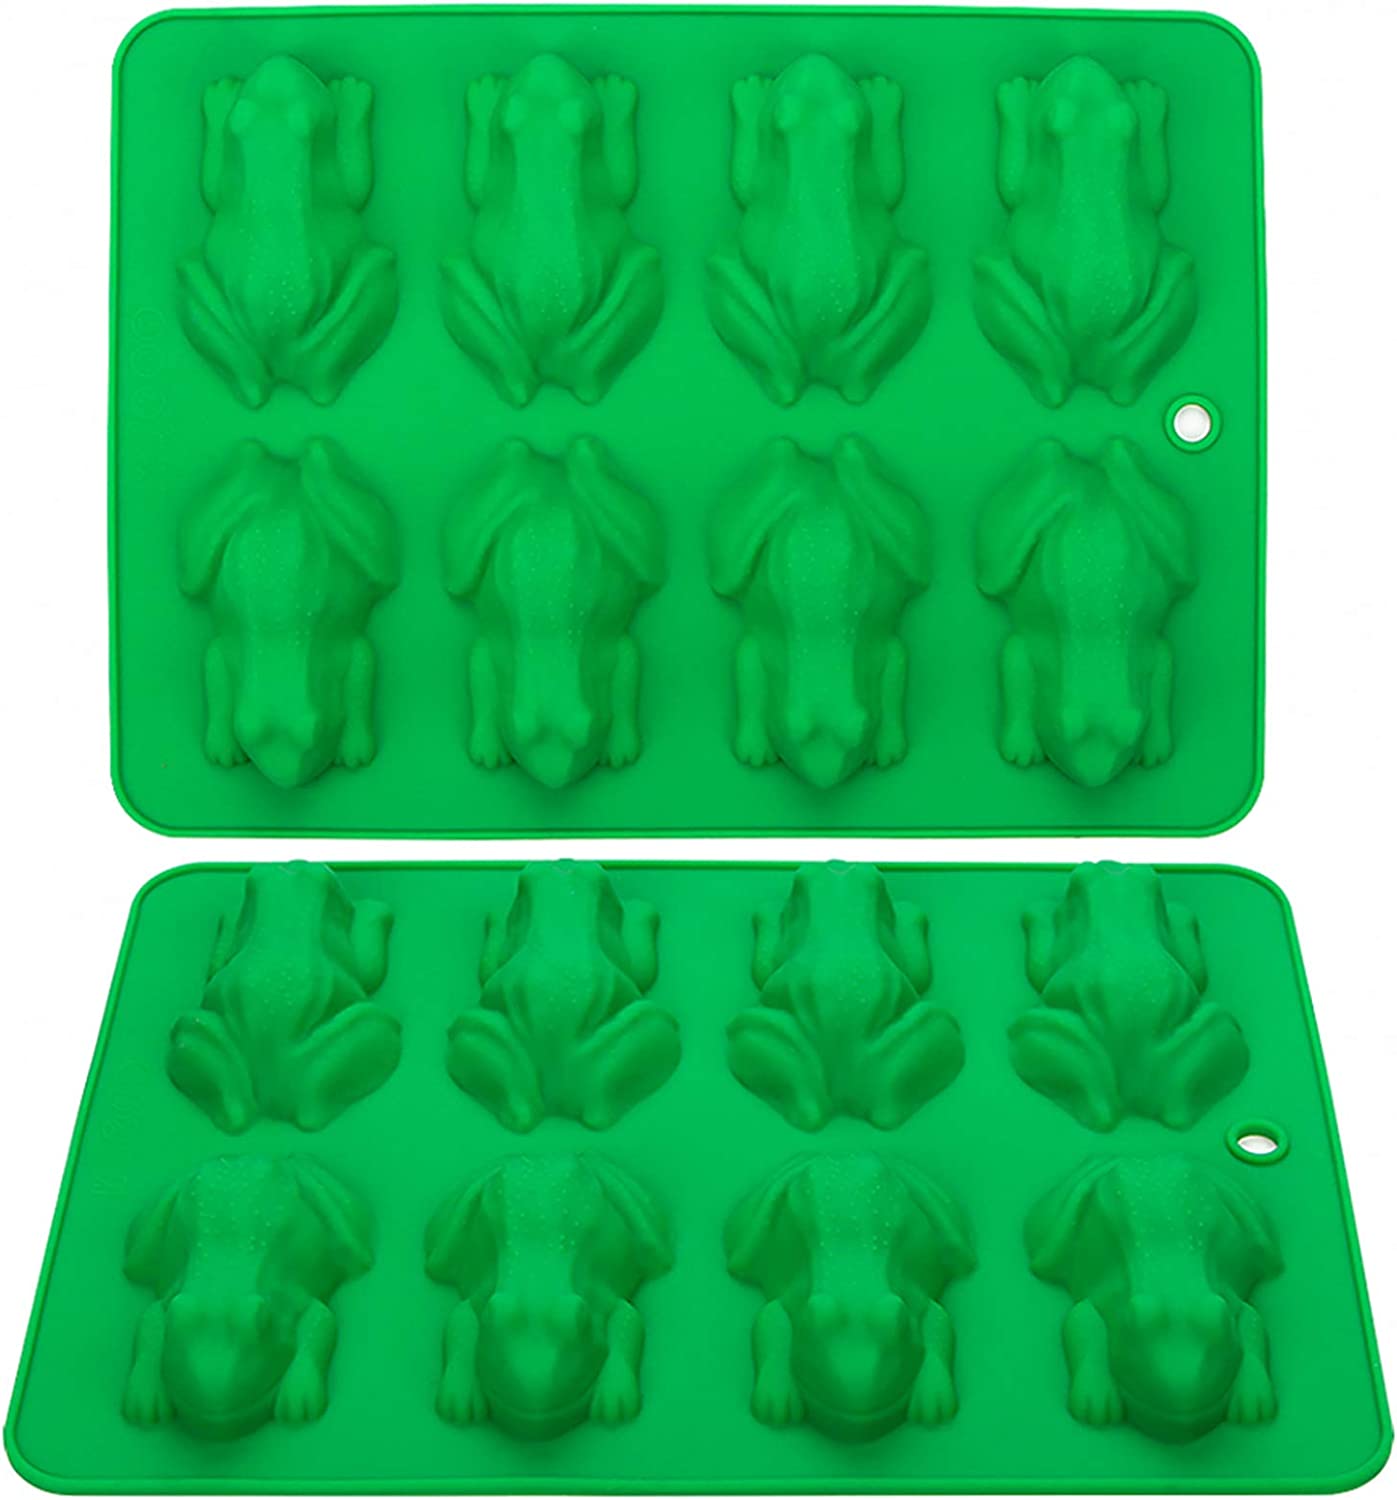 HARRY POTTER™ Silicone Candy Molds, Set of 2